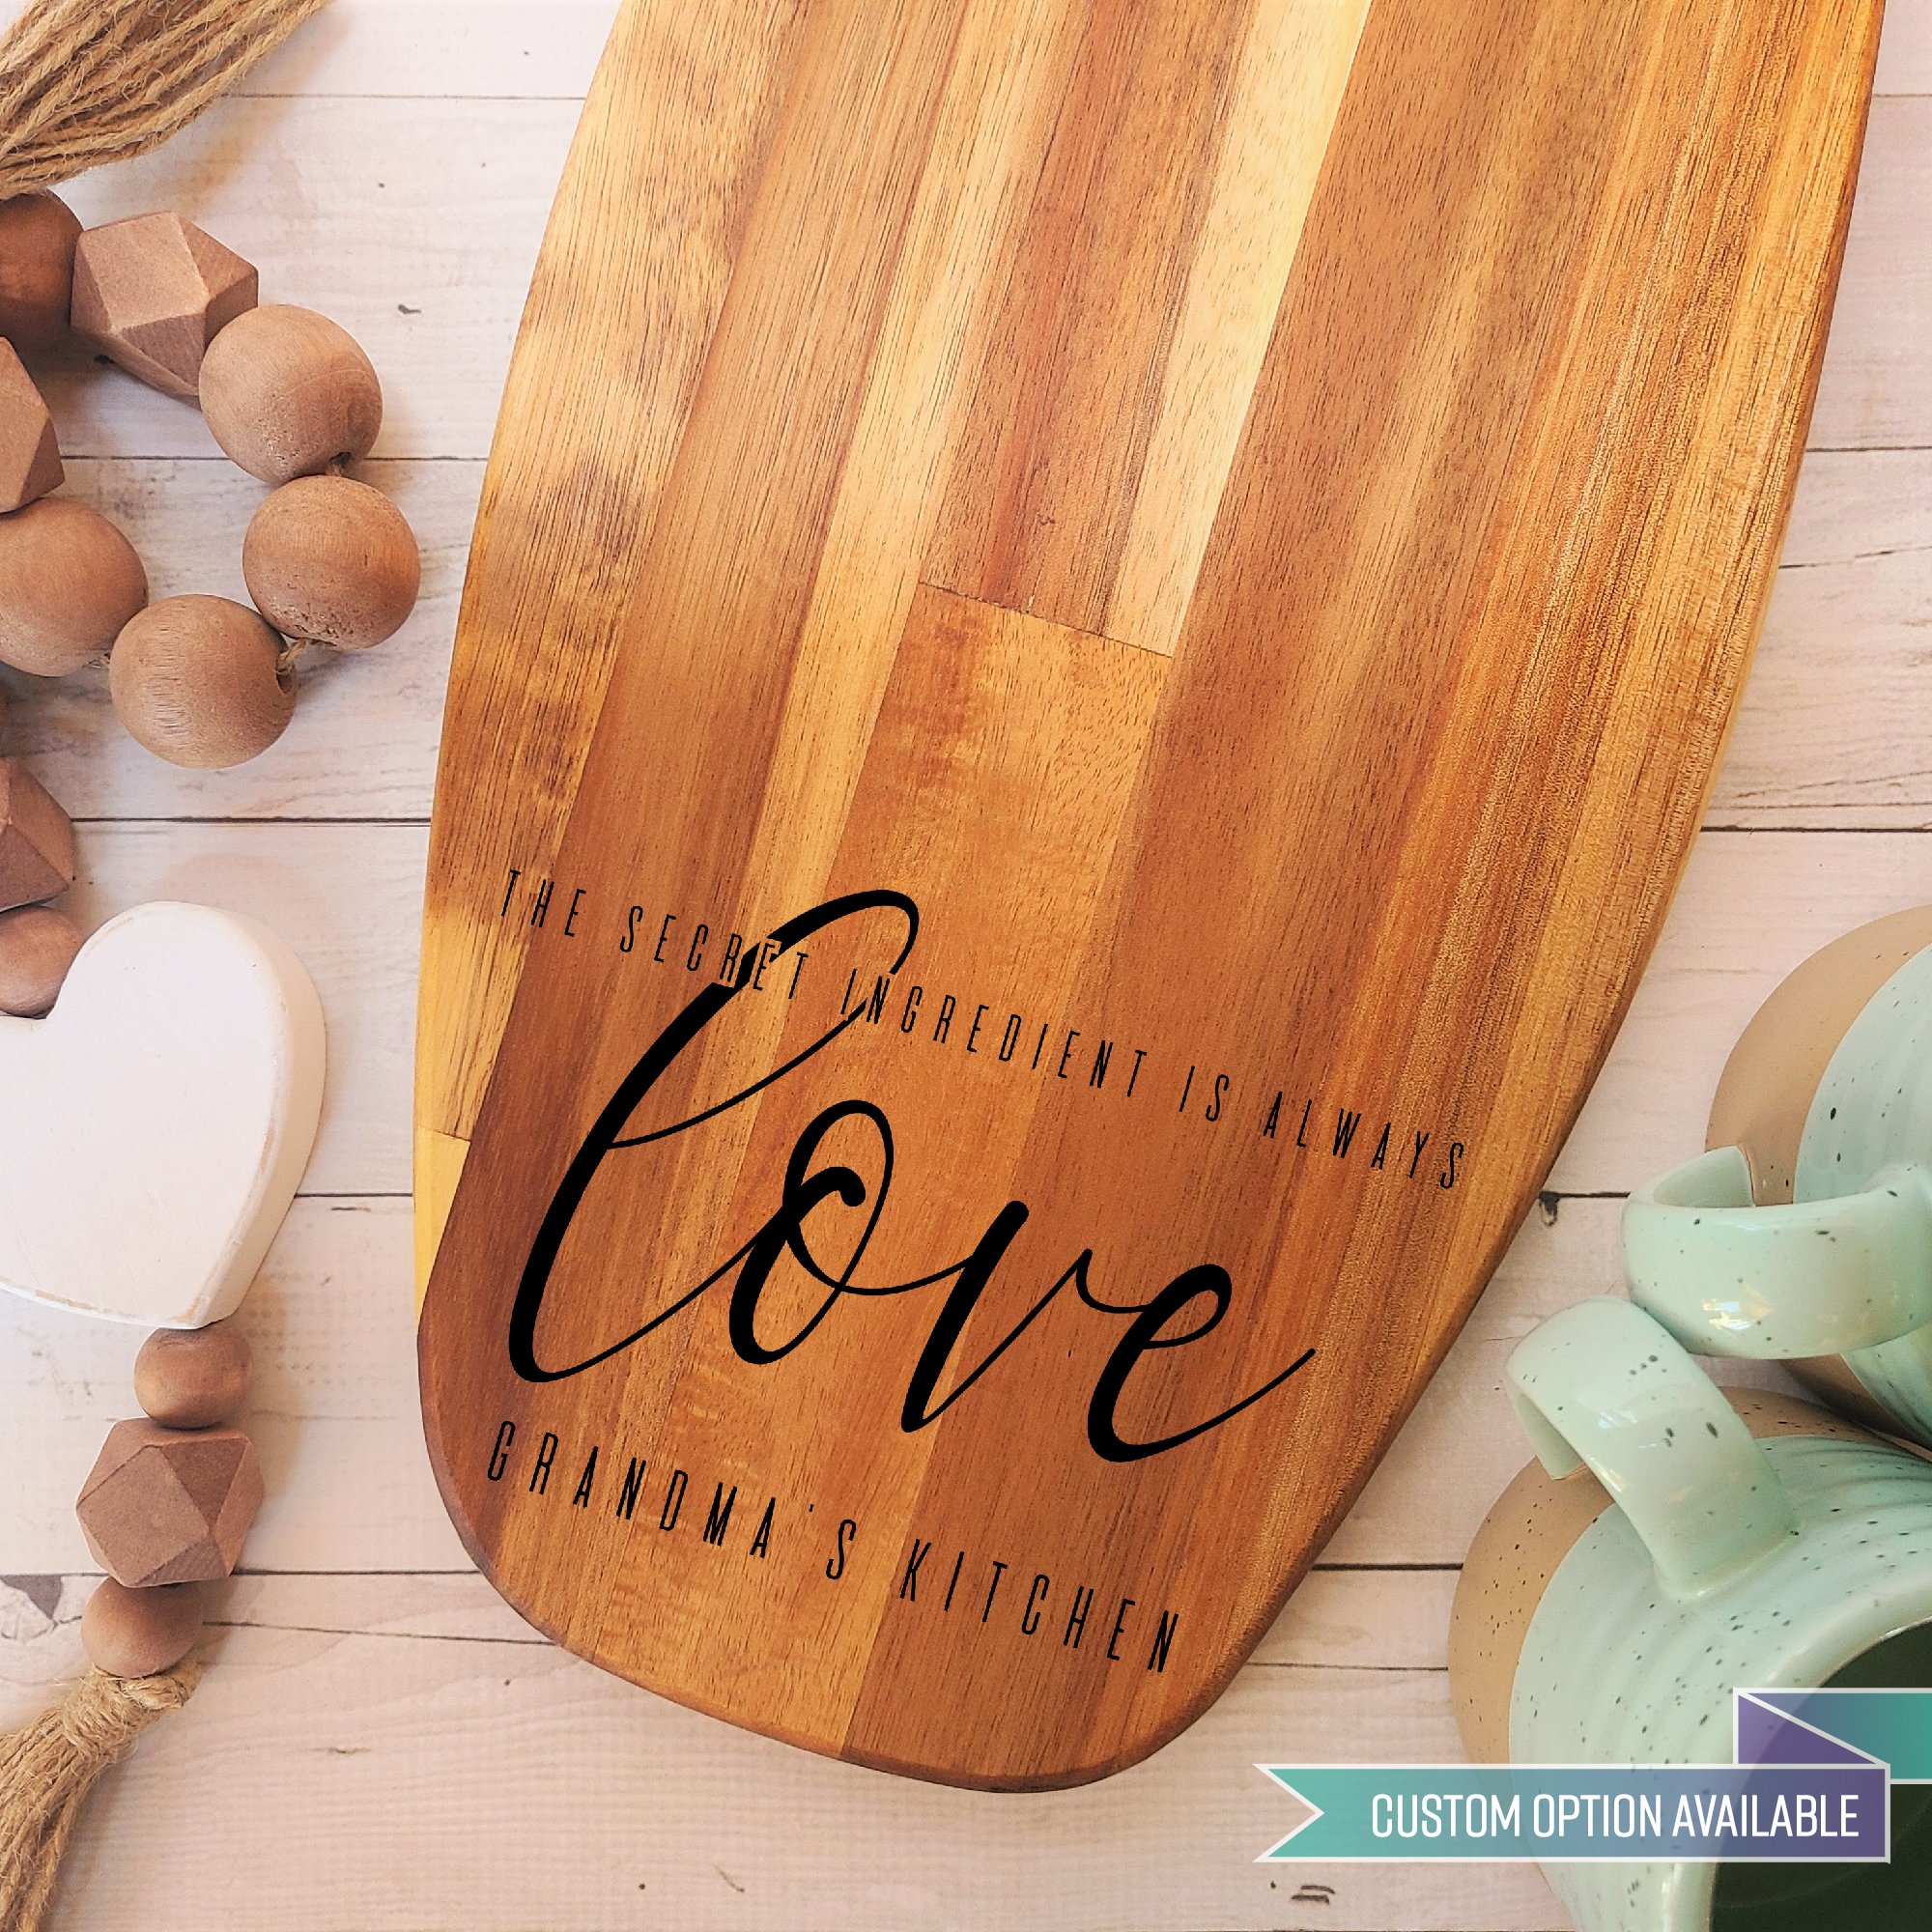 Optional Wooden cutting board, For Kitchen